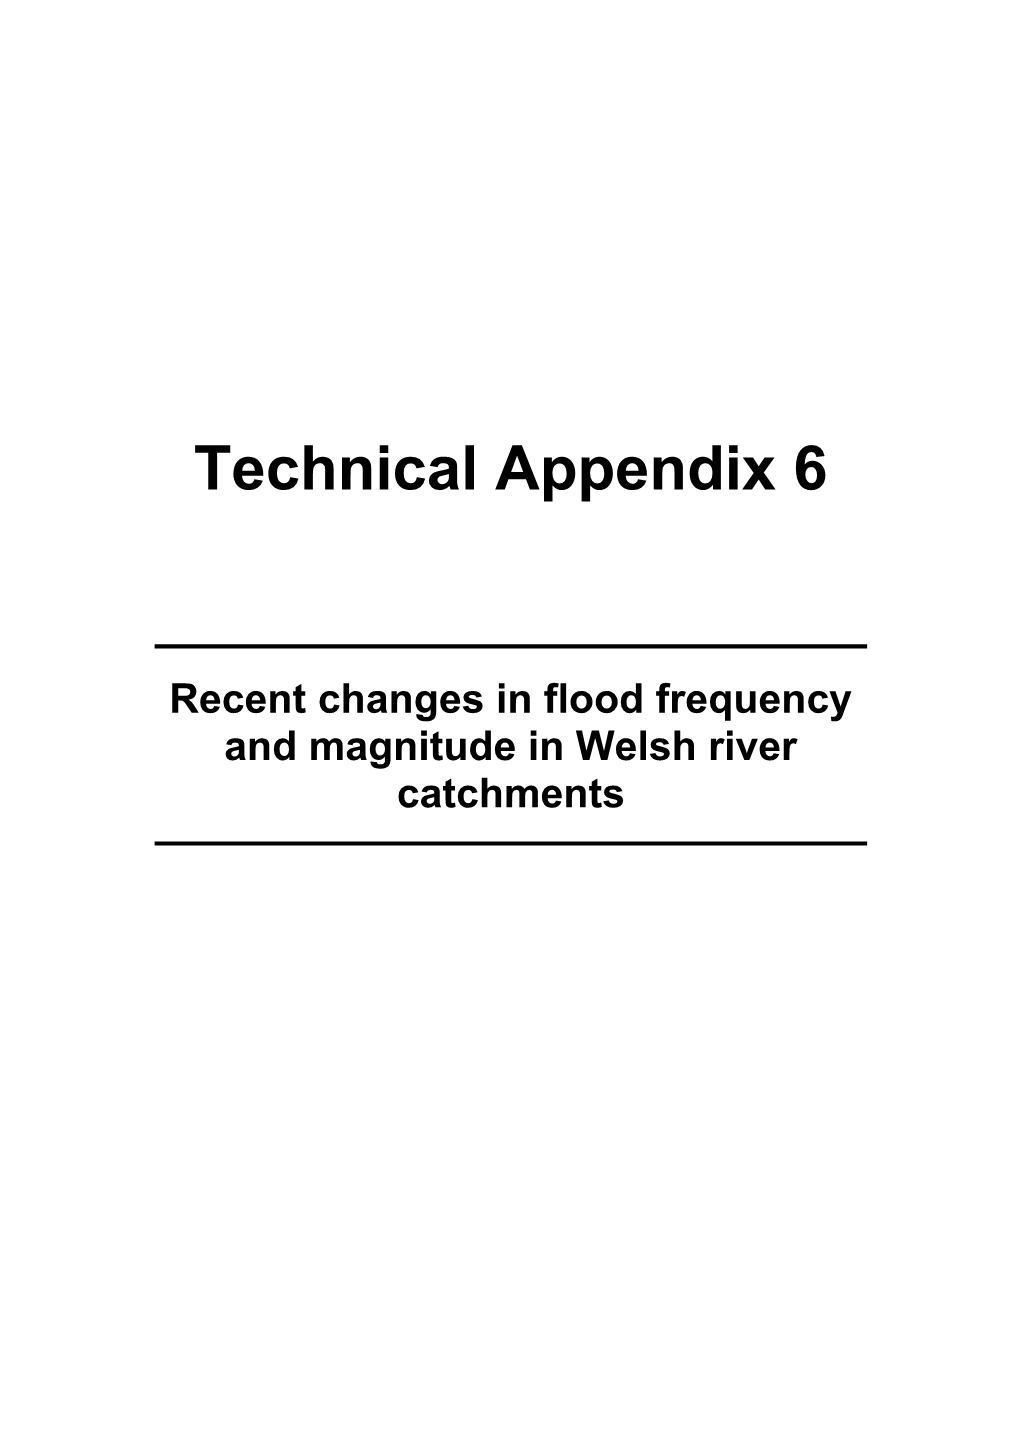 Technical Appendix 6: Recent Changes in Flood Frequency and Magnitude in Welsh River Catchments